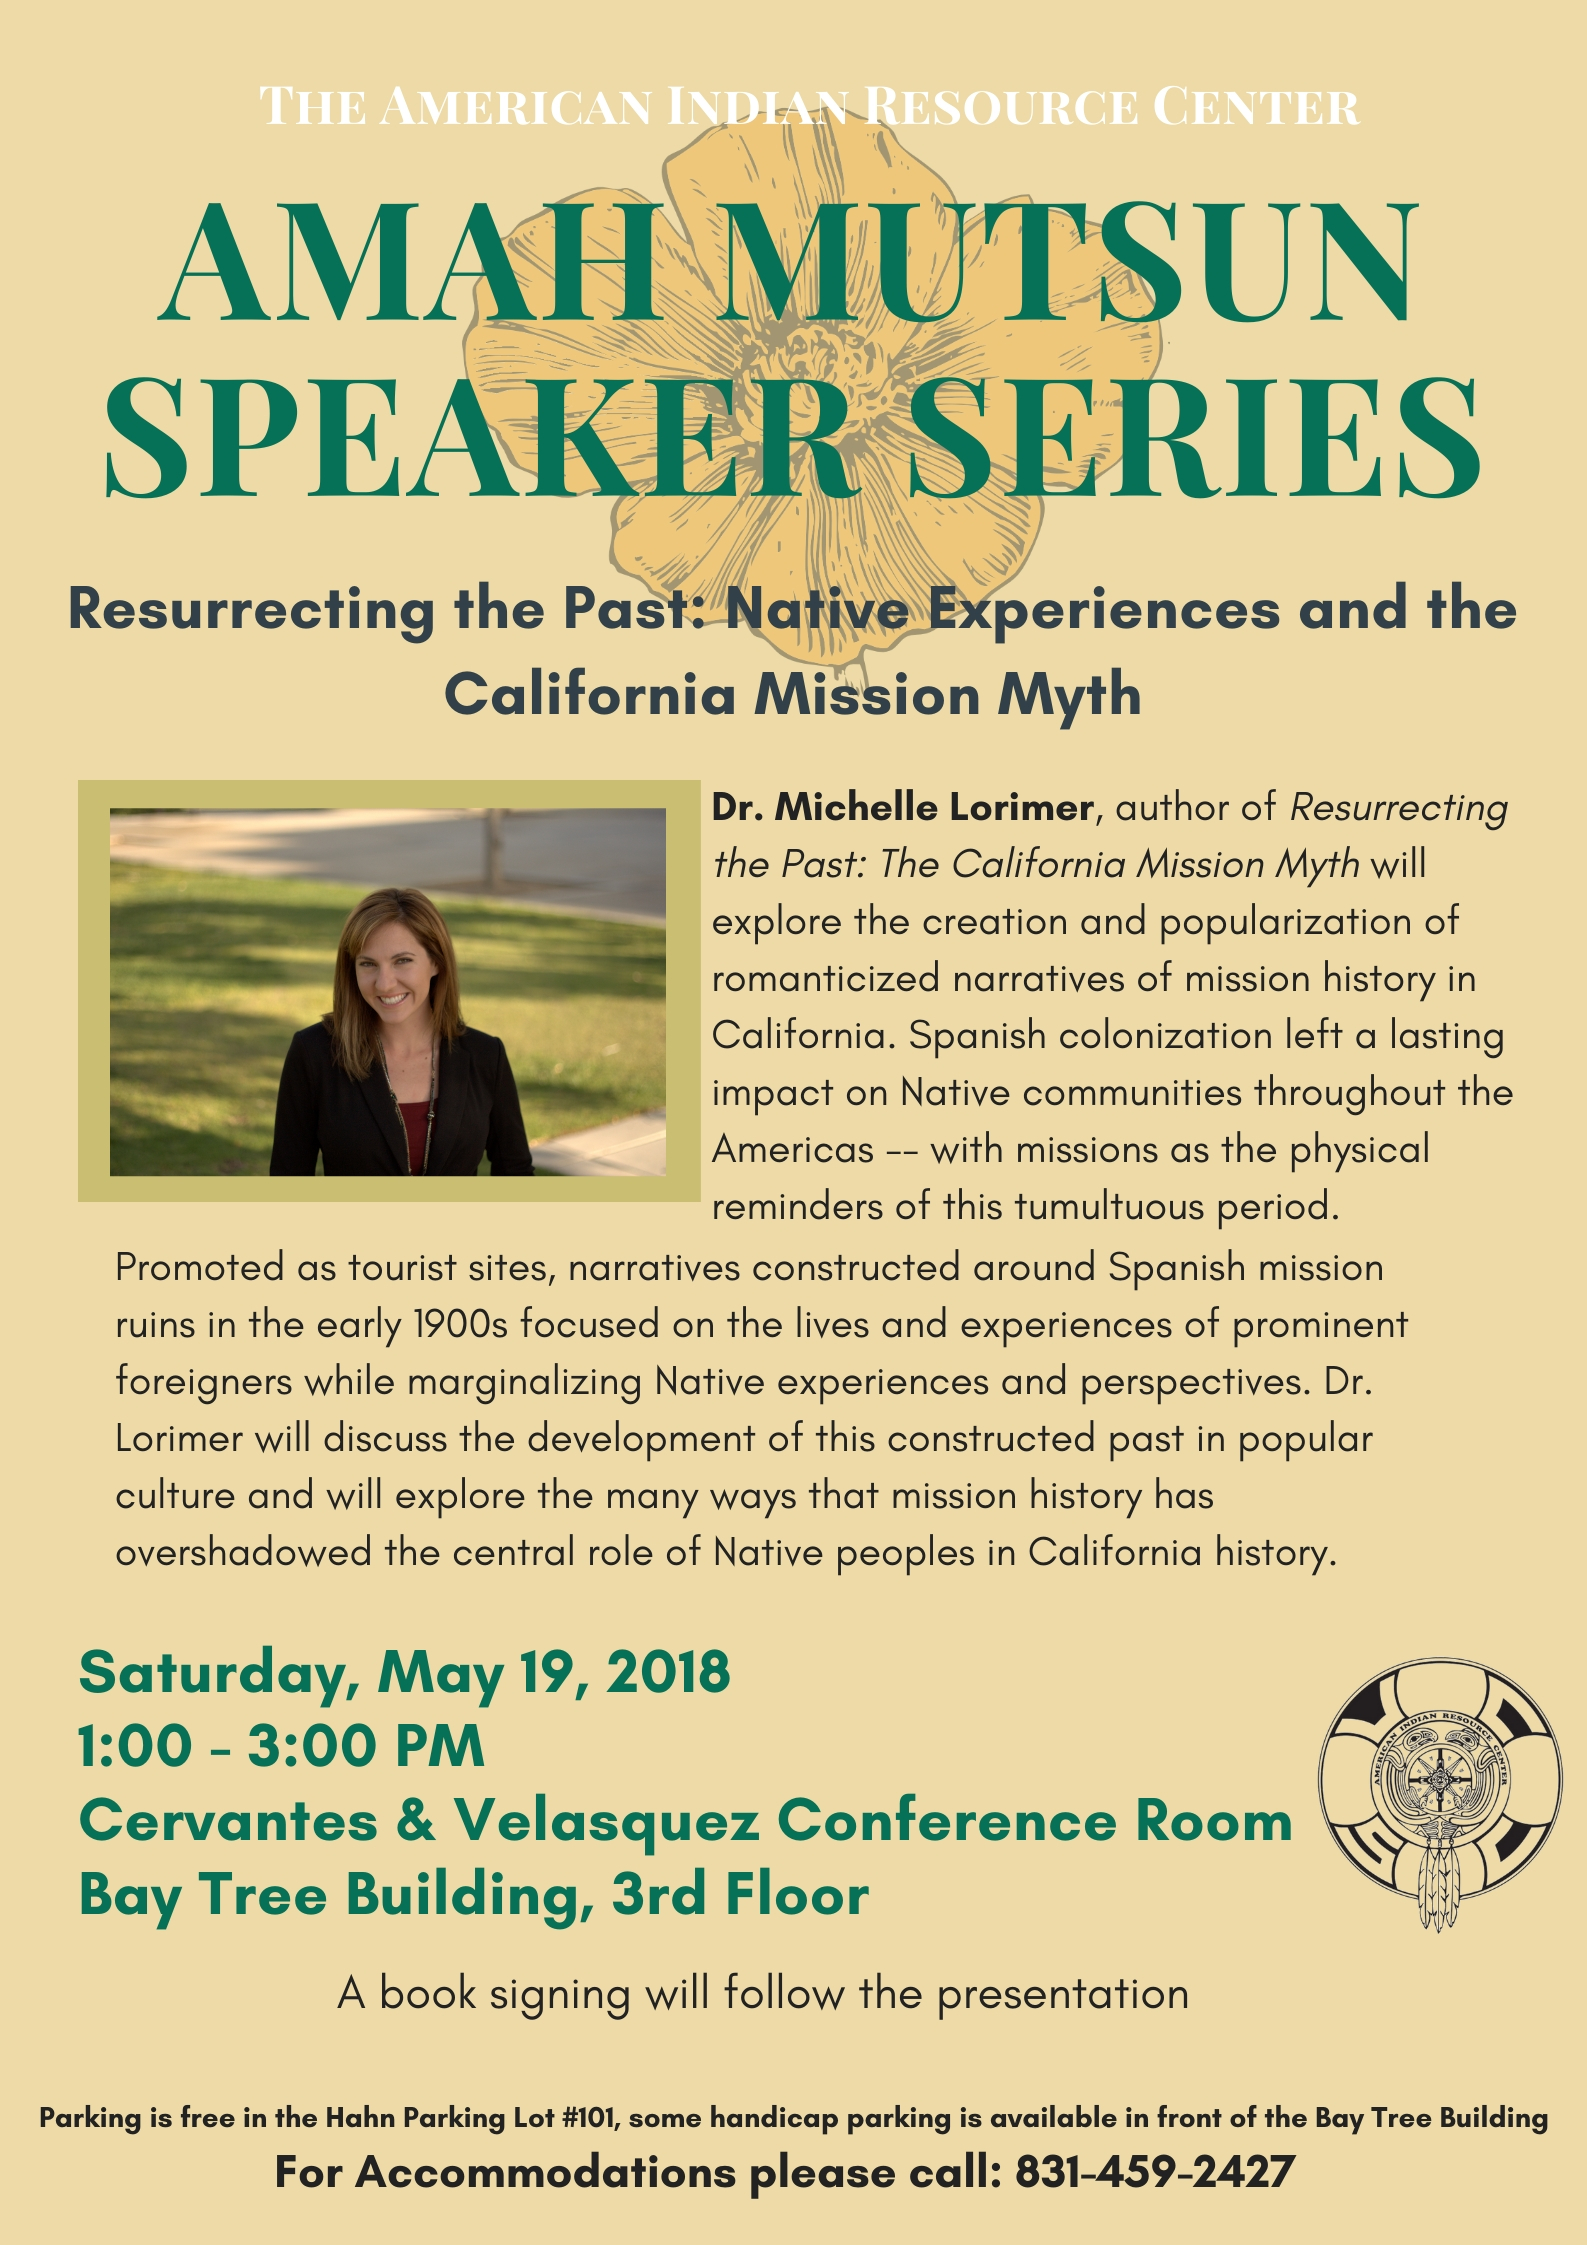 Amah Mutsun Speaker Series: Resurrecting the Past: Native Experiences and the California Mission Myth with Dr. Michelle Lorimer